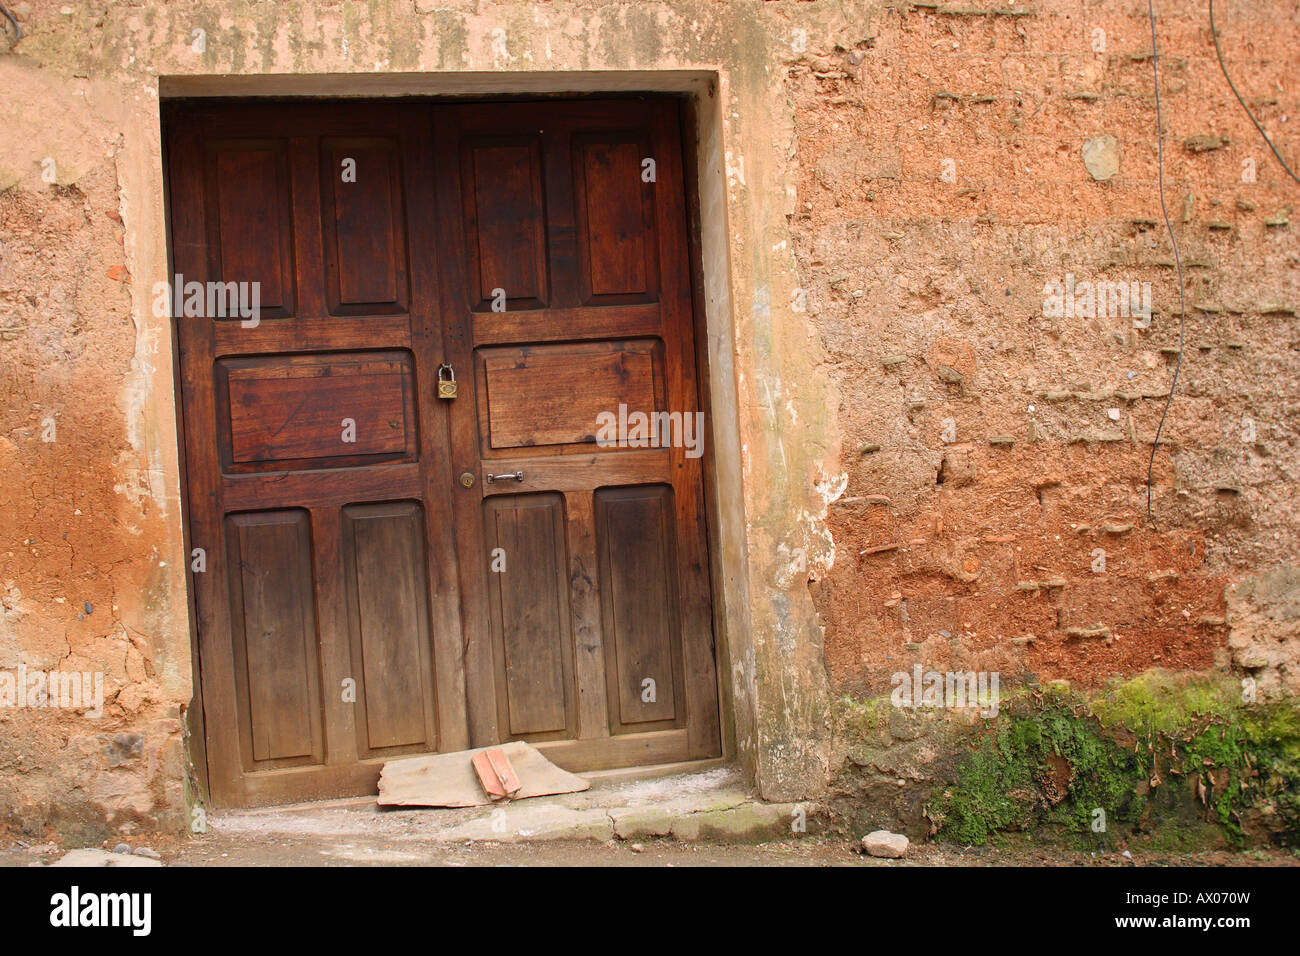 A closed, locked, old wooden door of a building in Coroico, Bolivia. Stock Photo